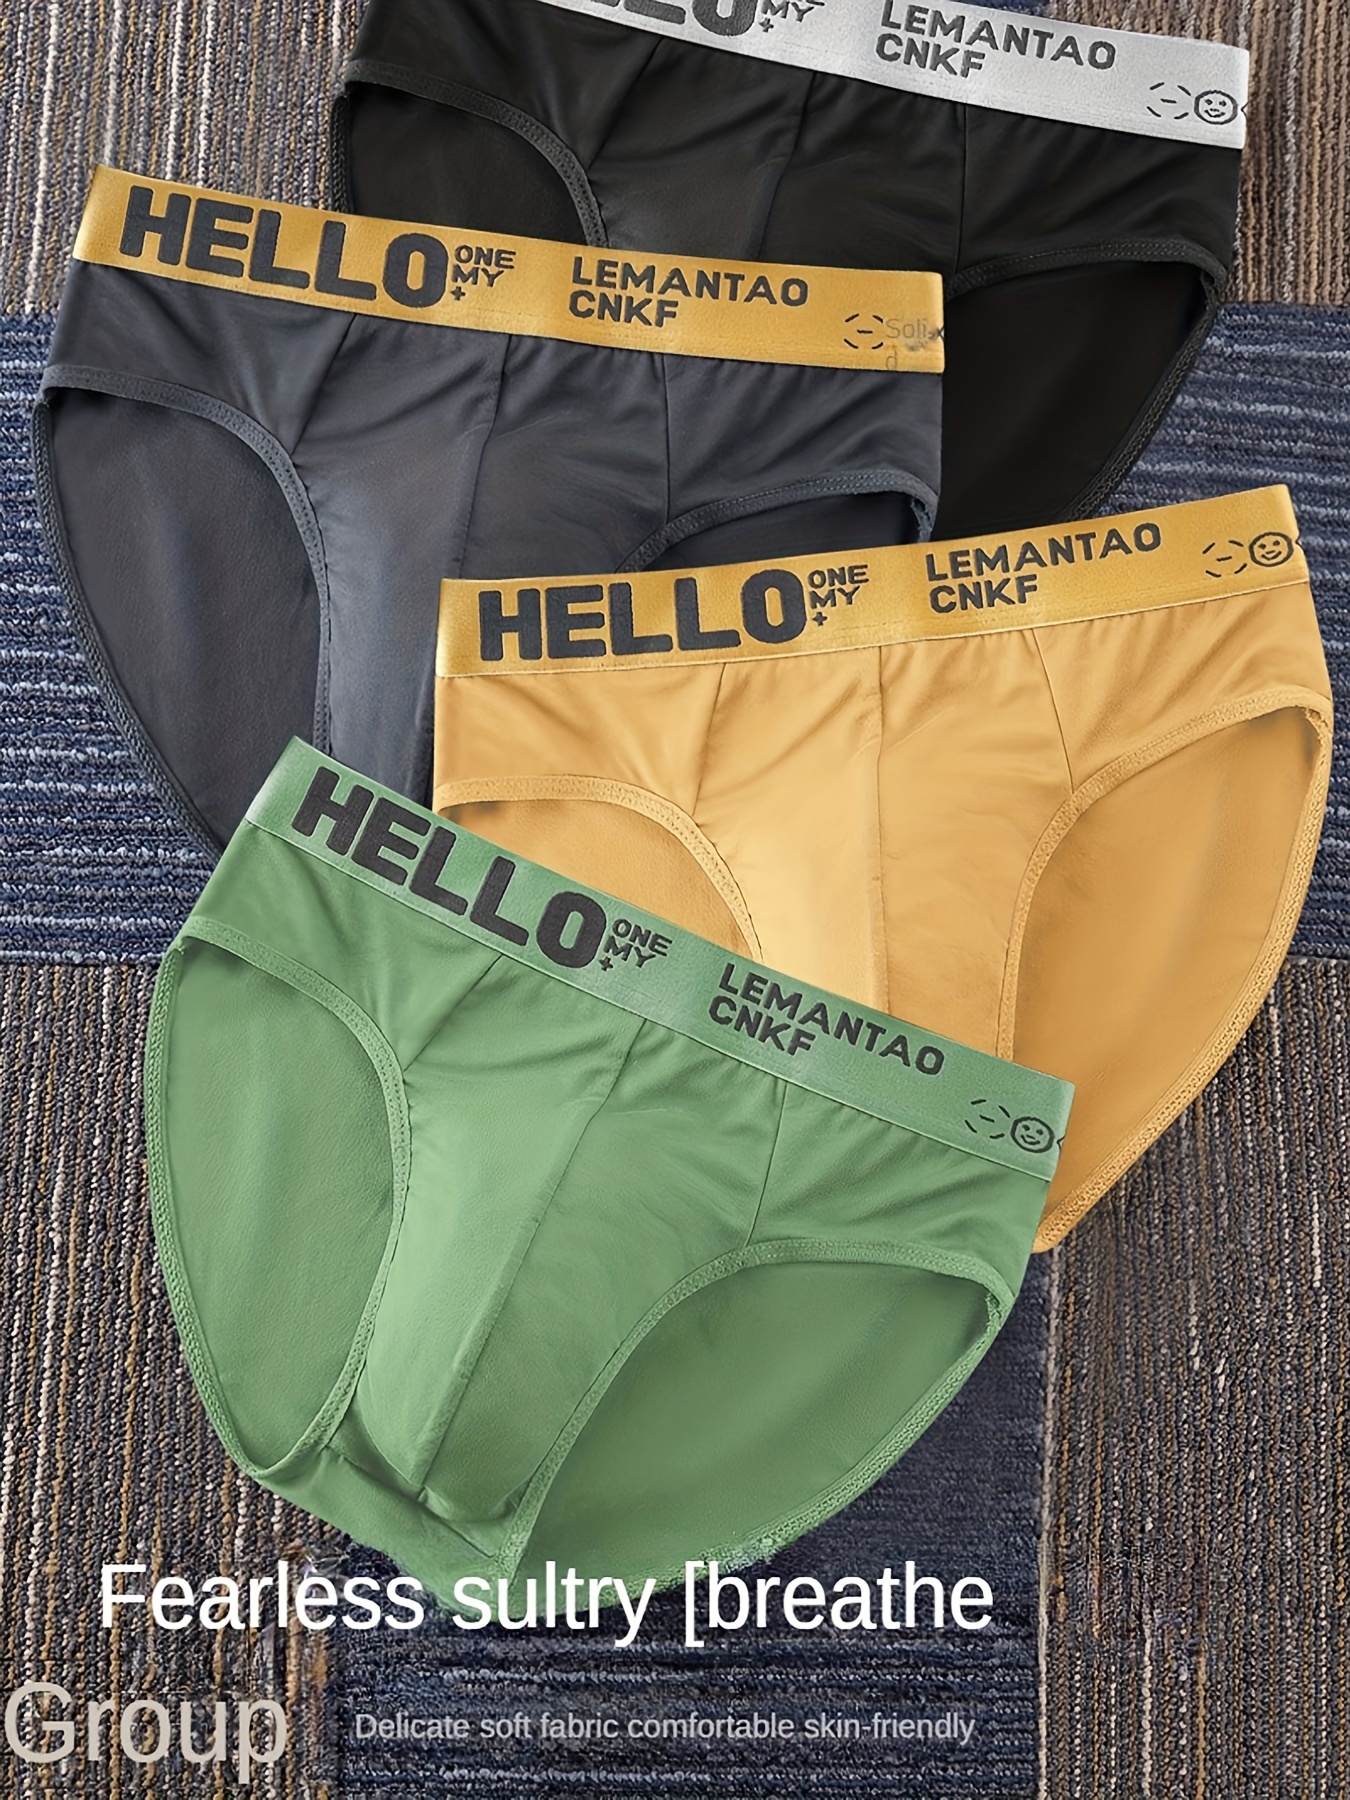 Hello Big Boy. Charlie's NEW Magnum Underwear is Available Now